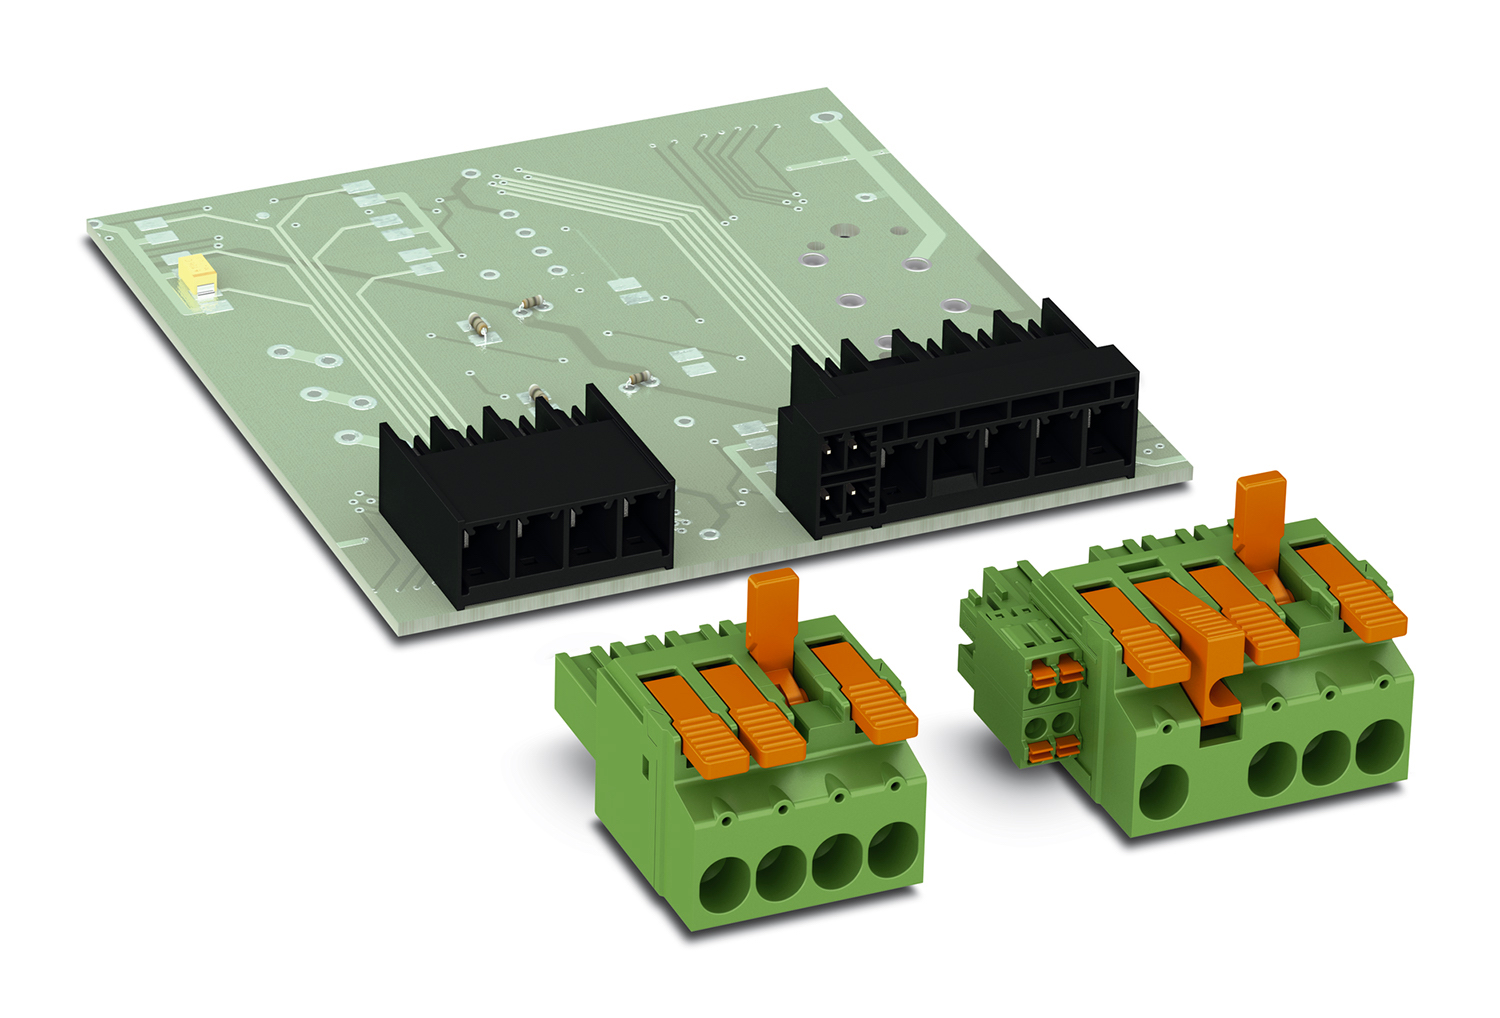 Wire-to-board connector products: Phoenix Contact’s Levered Power Combicon (LPC) PCB Connectors